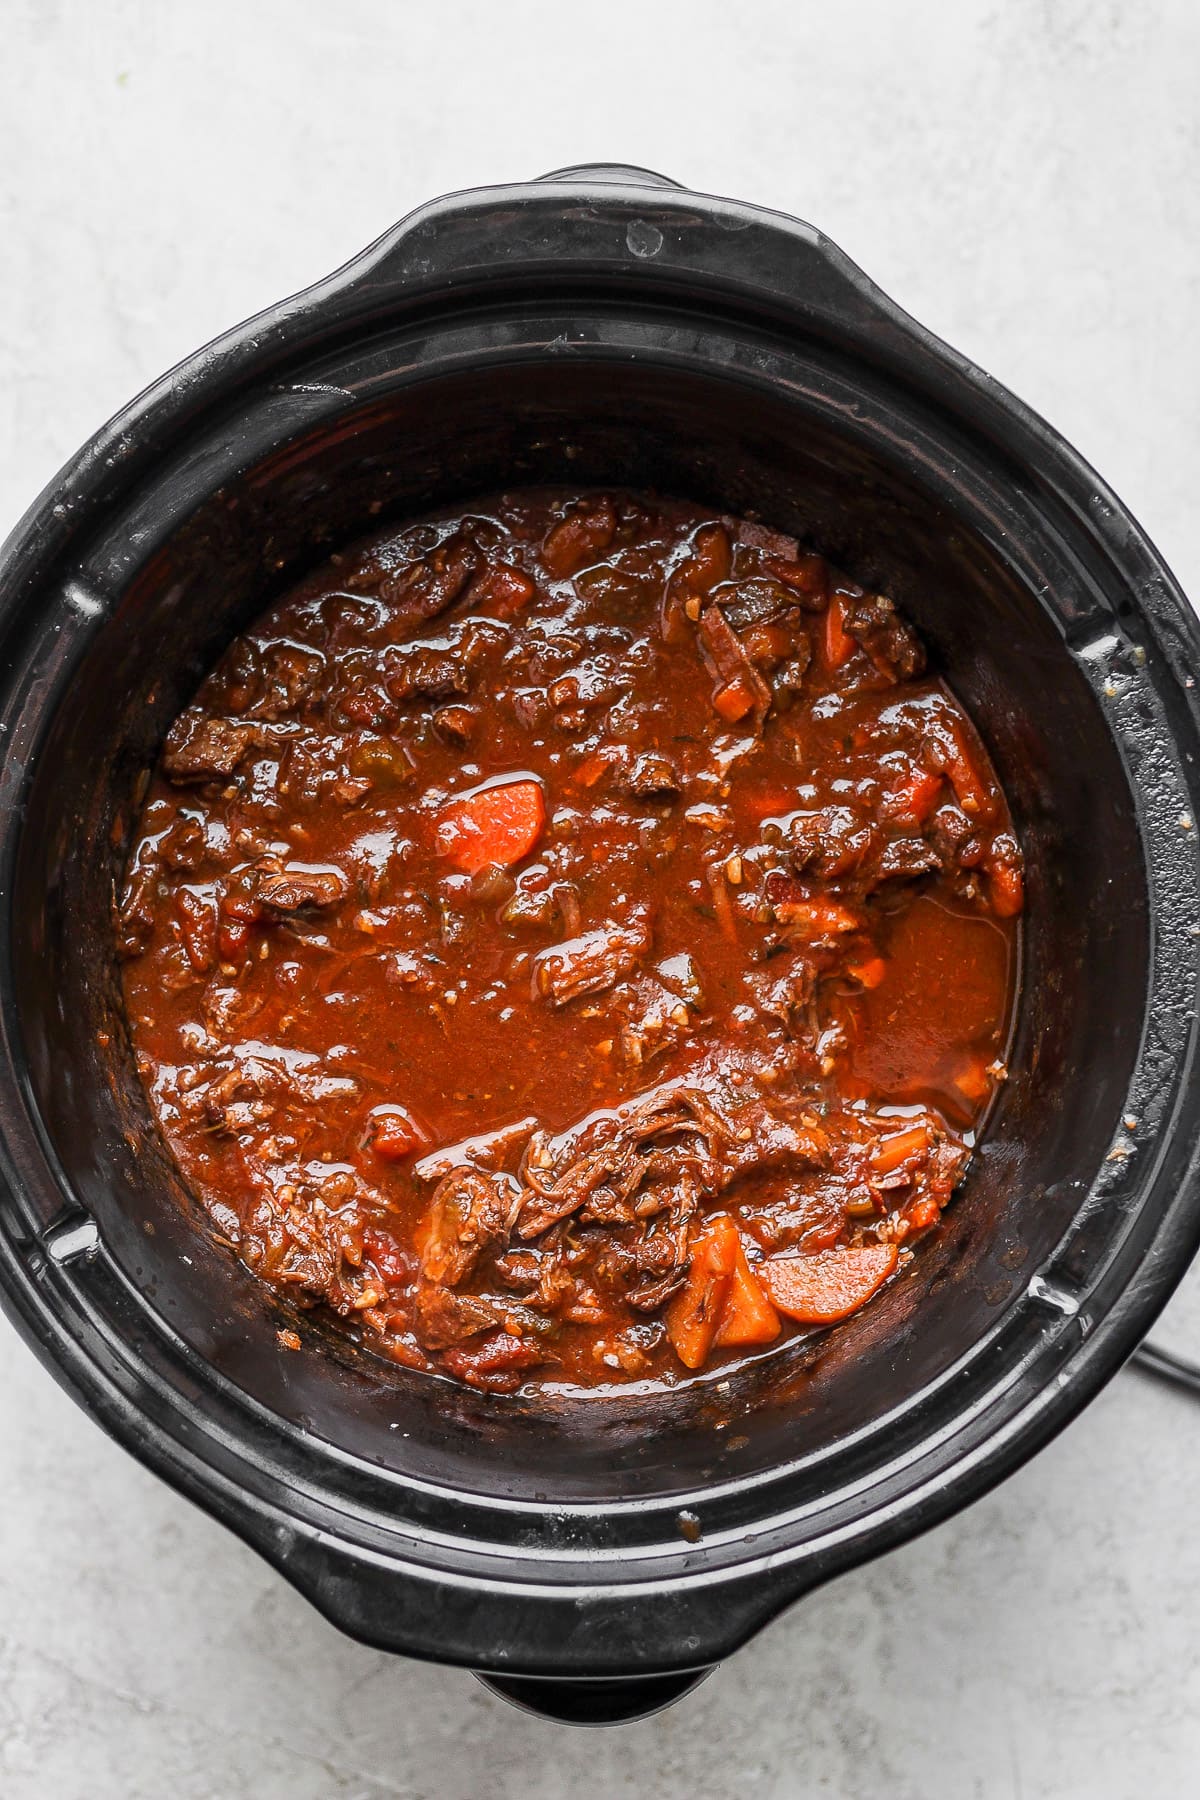 Cooked beef ragu in a slow cooker.